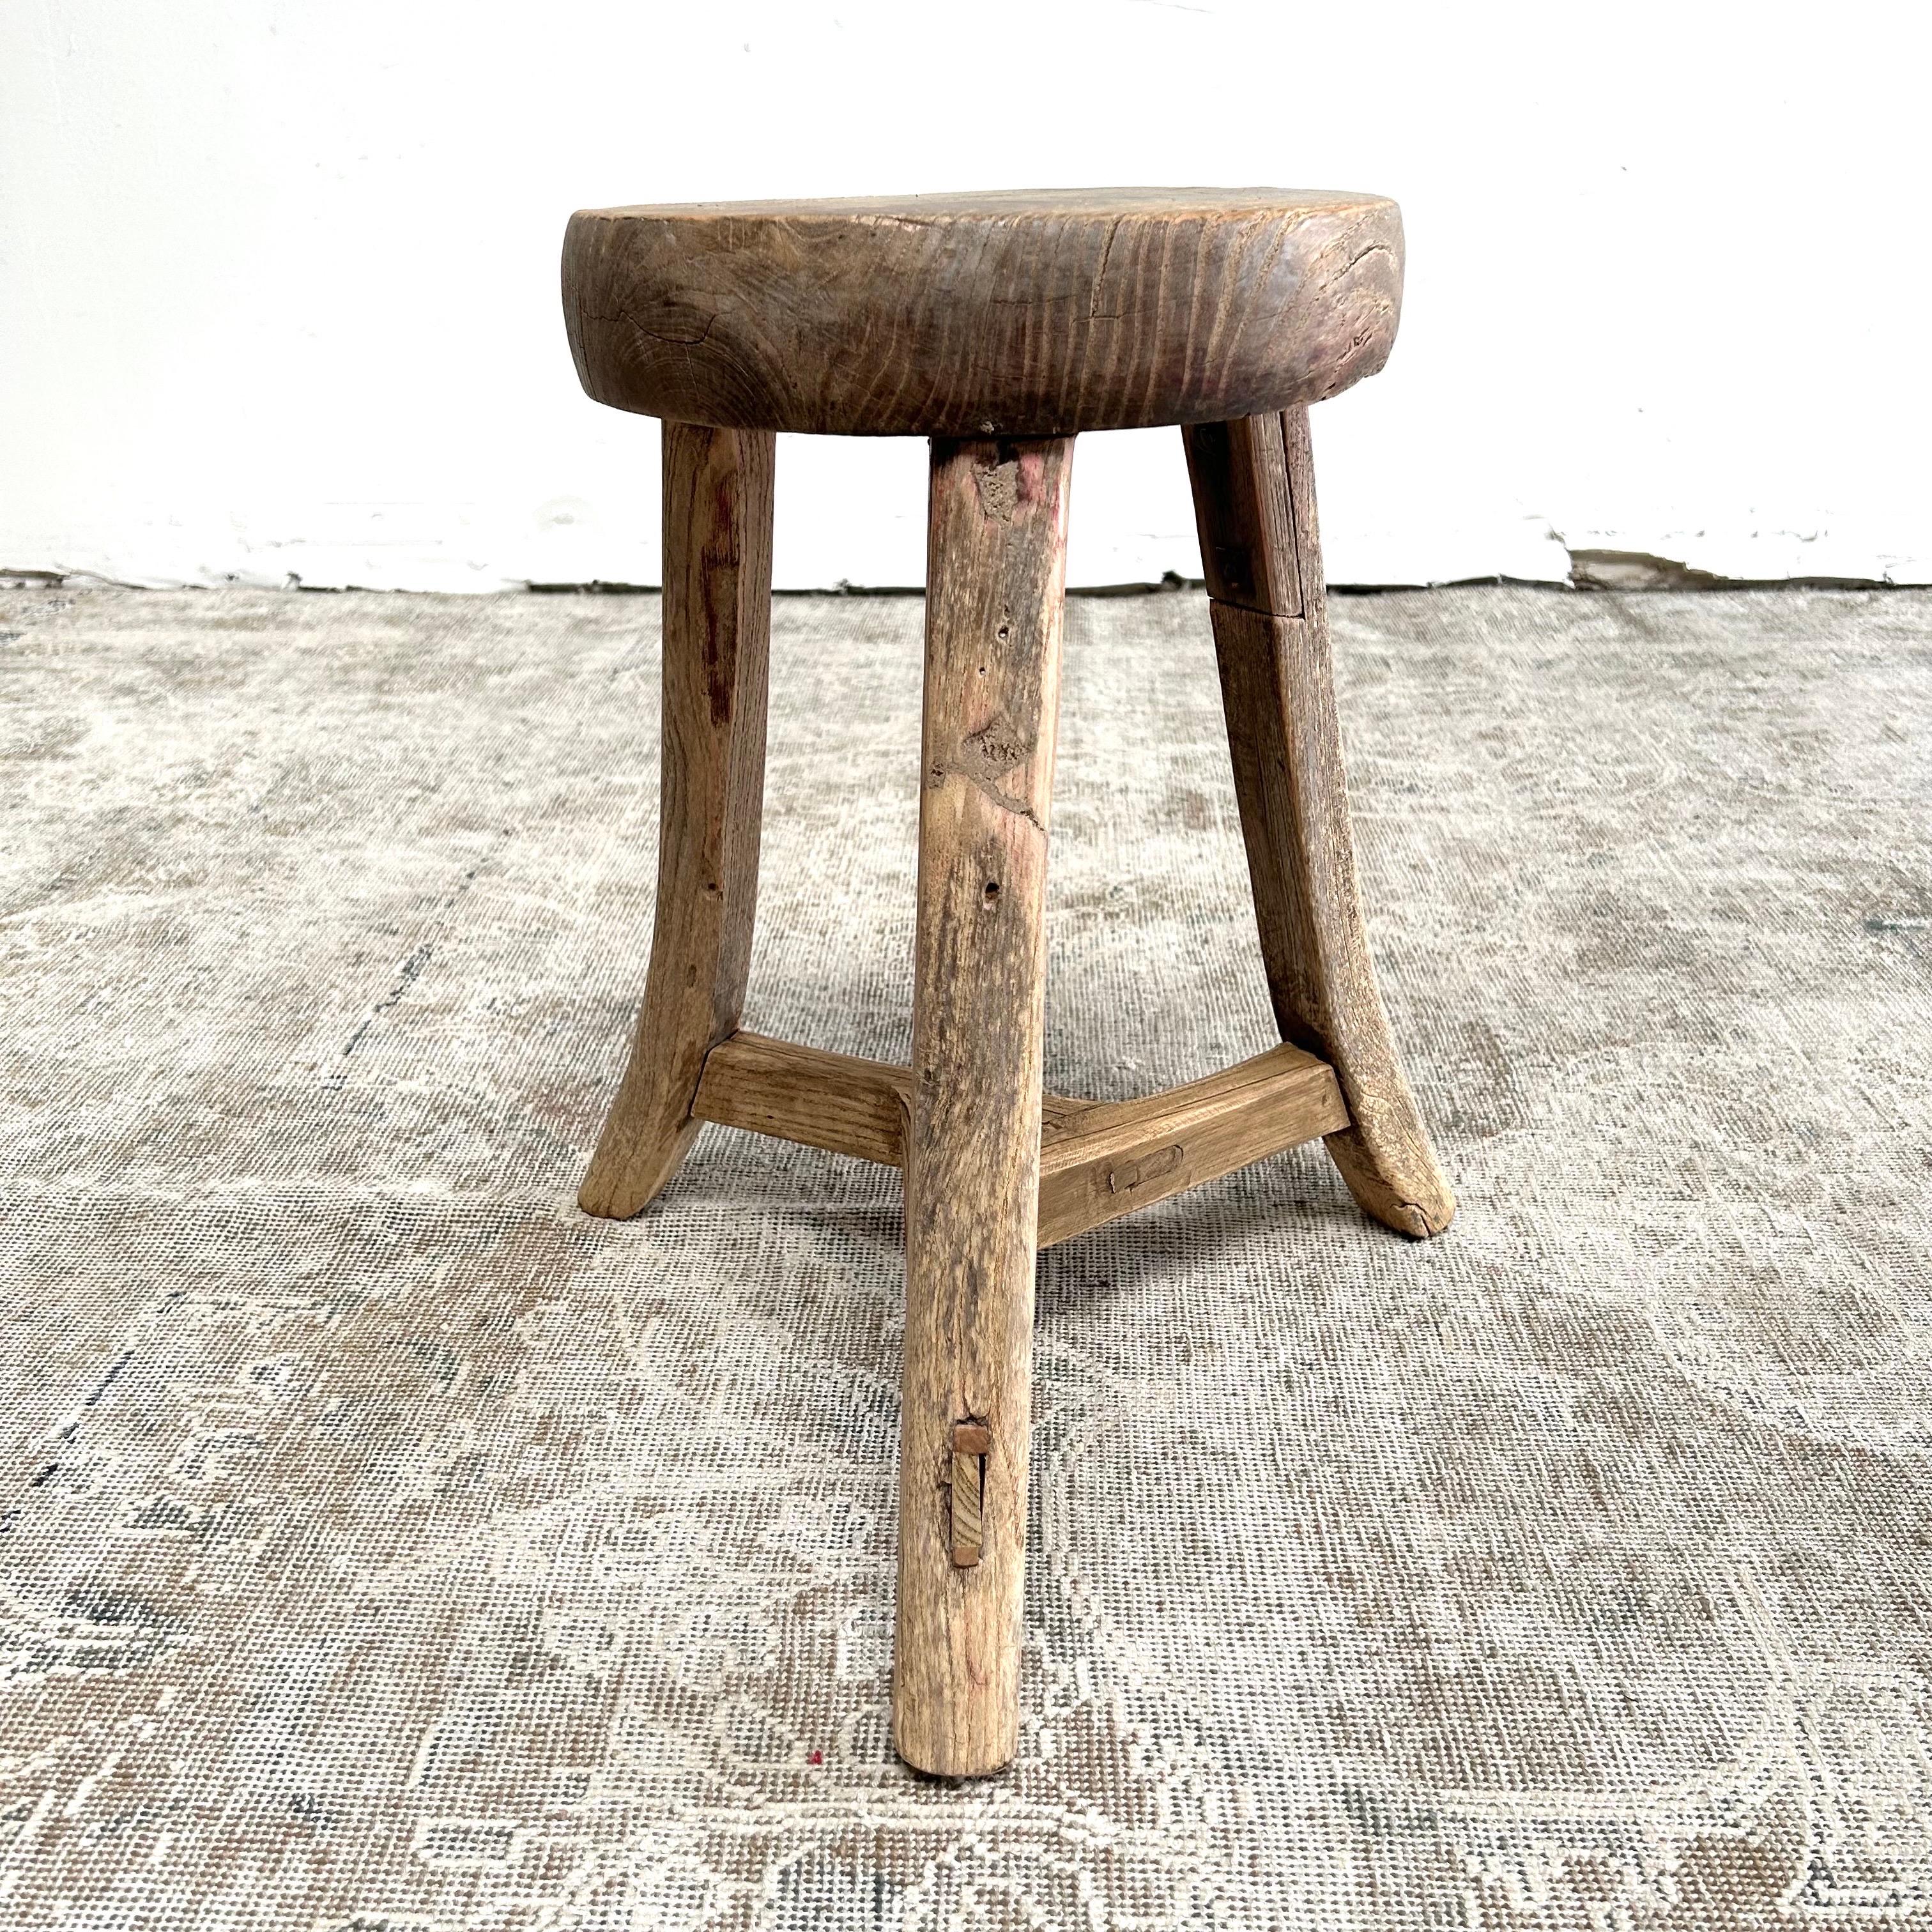 Rd. Elm stool legs span out to 18”w x 18”d x 20”total height 
Seat:11” rd.
These are the real vintage antique elm wood stools! Beautiful antique patina, with weathering and age, these are solid and sturdy ready for daily use, use as a table,